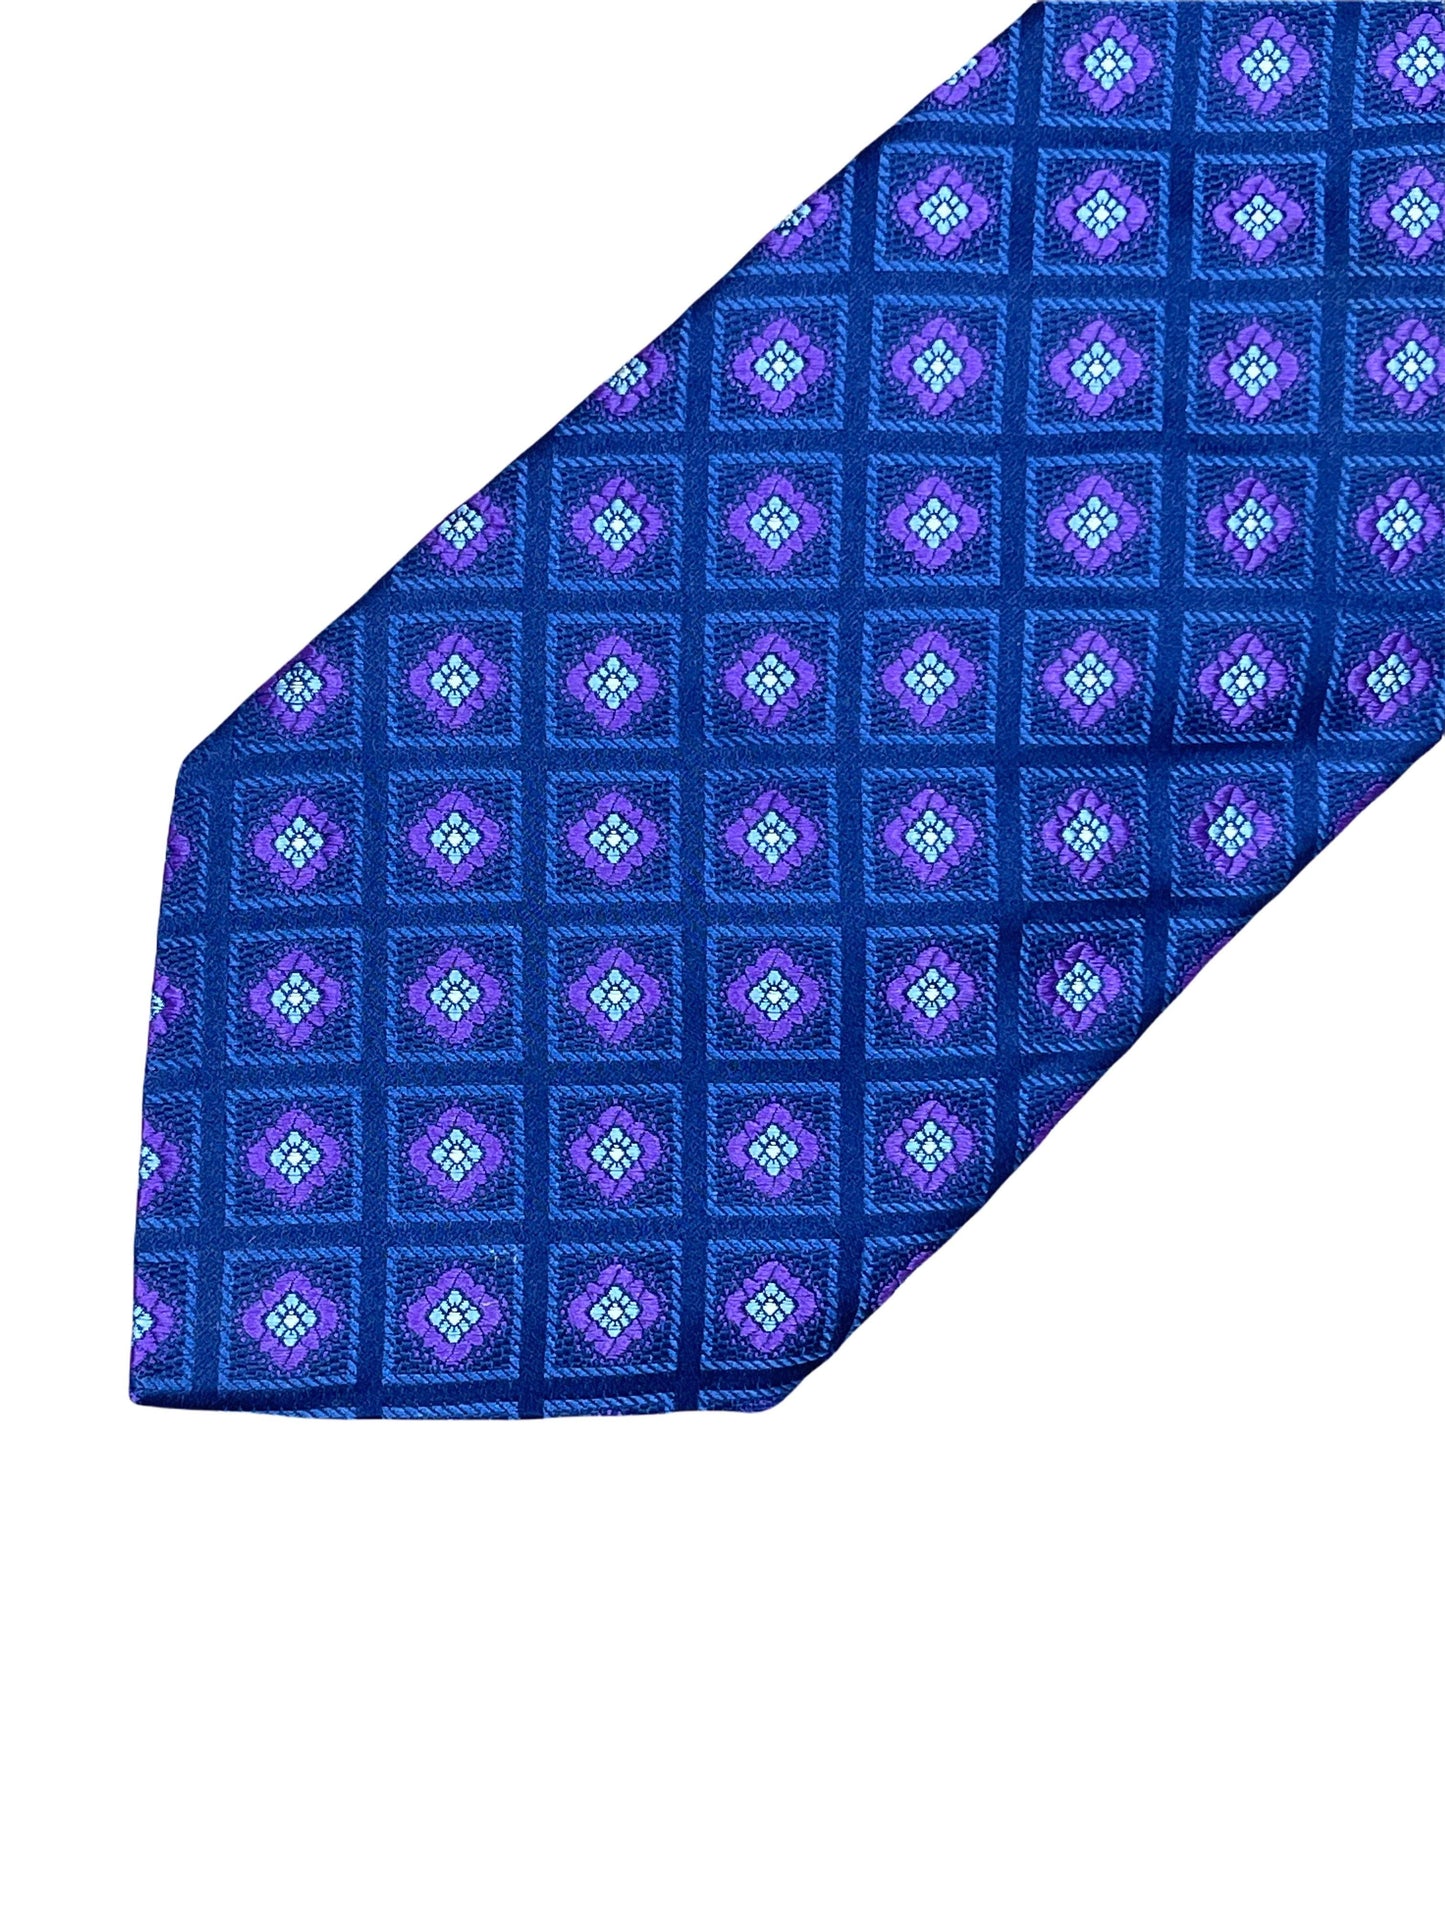 Canali Navy with Purple floral 100% silk tie. Genuine Design luxury consignment